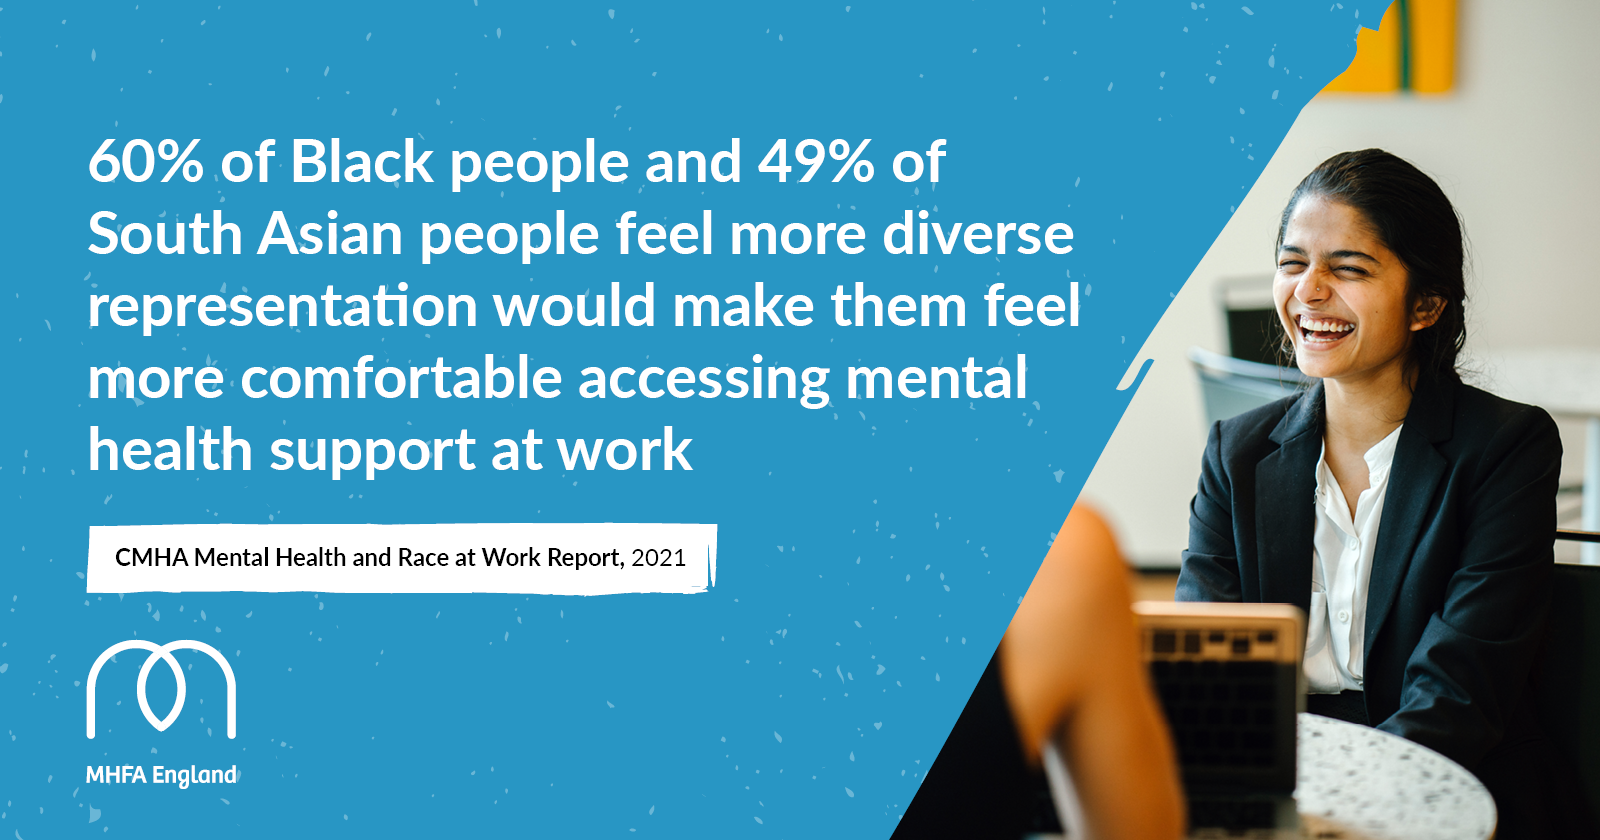 Over a quarter of Black People (29%) say their mental health has been negatively impacted by racism experienced at work